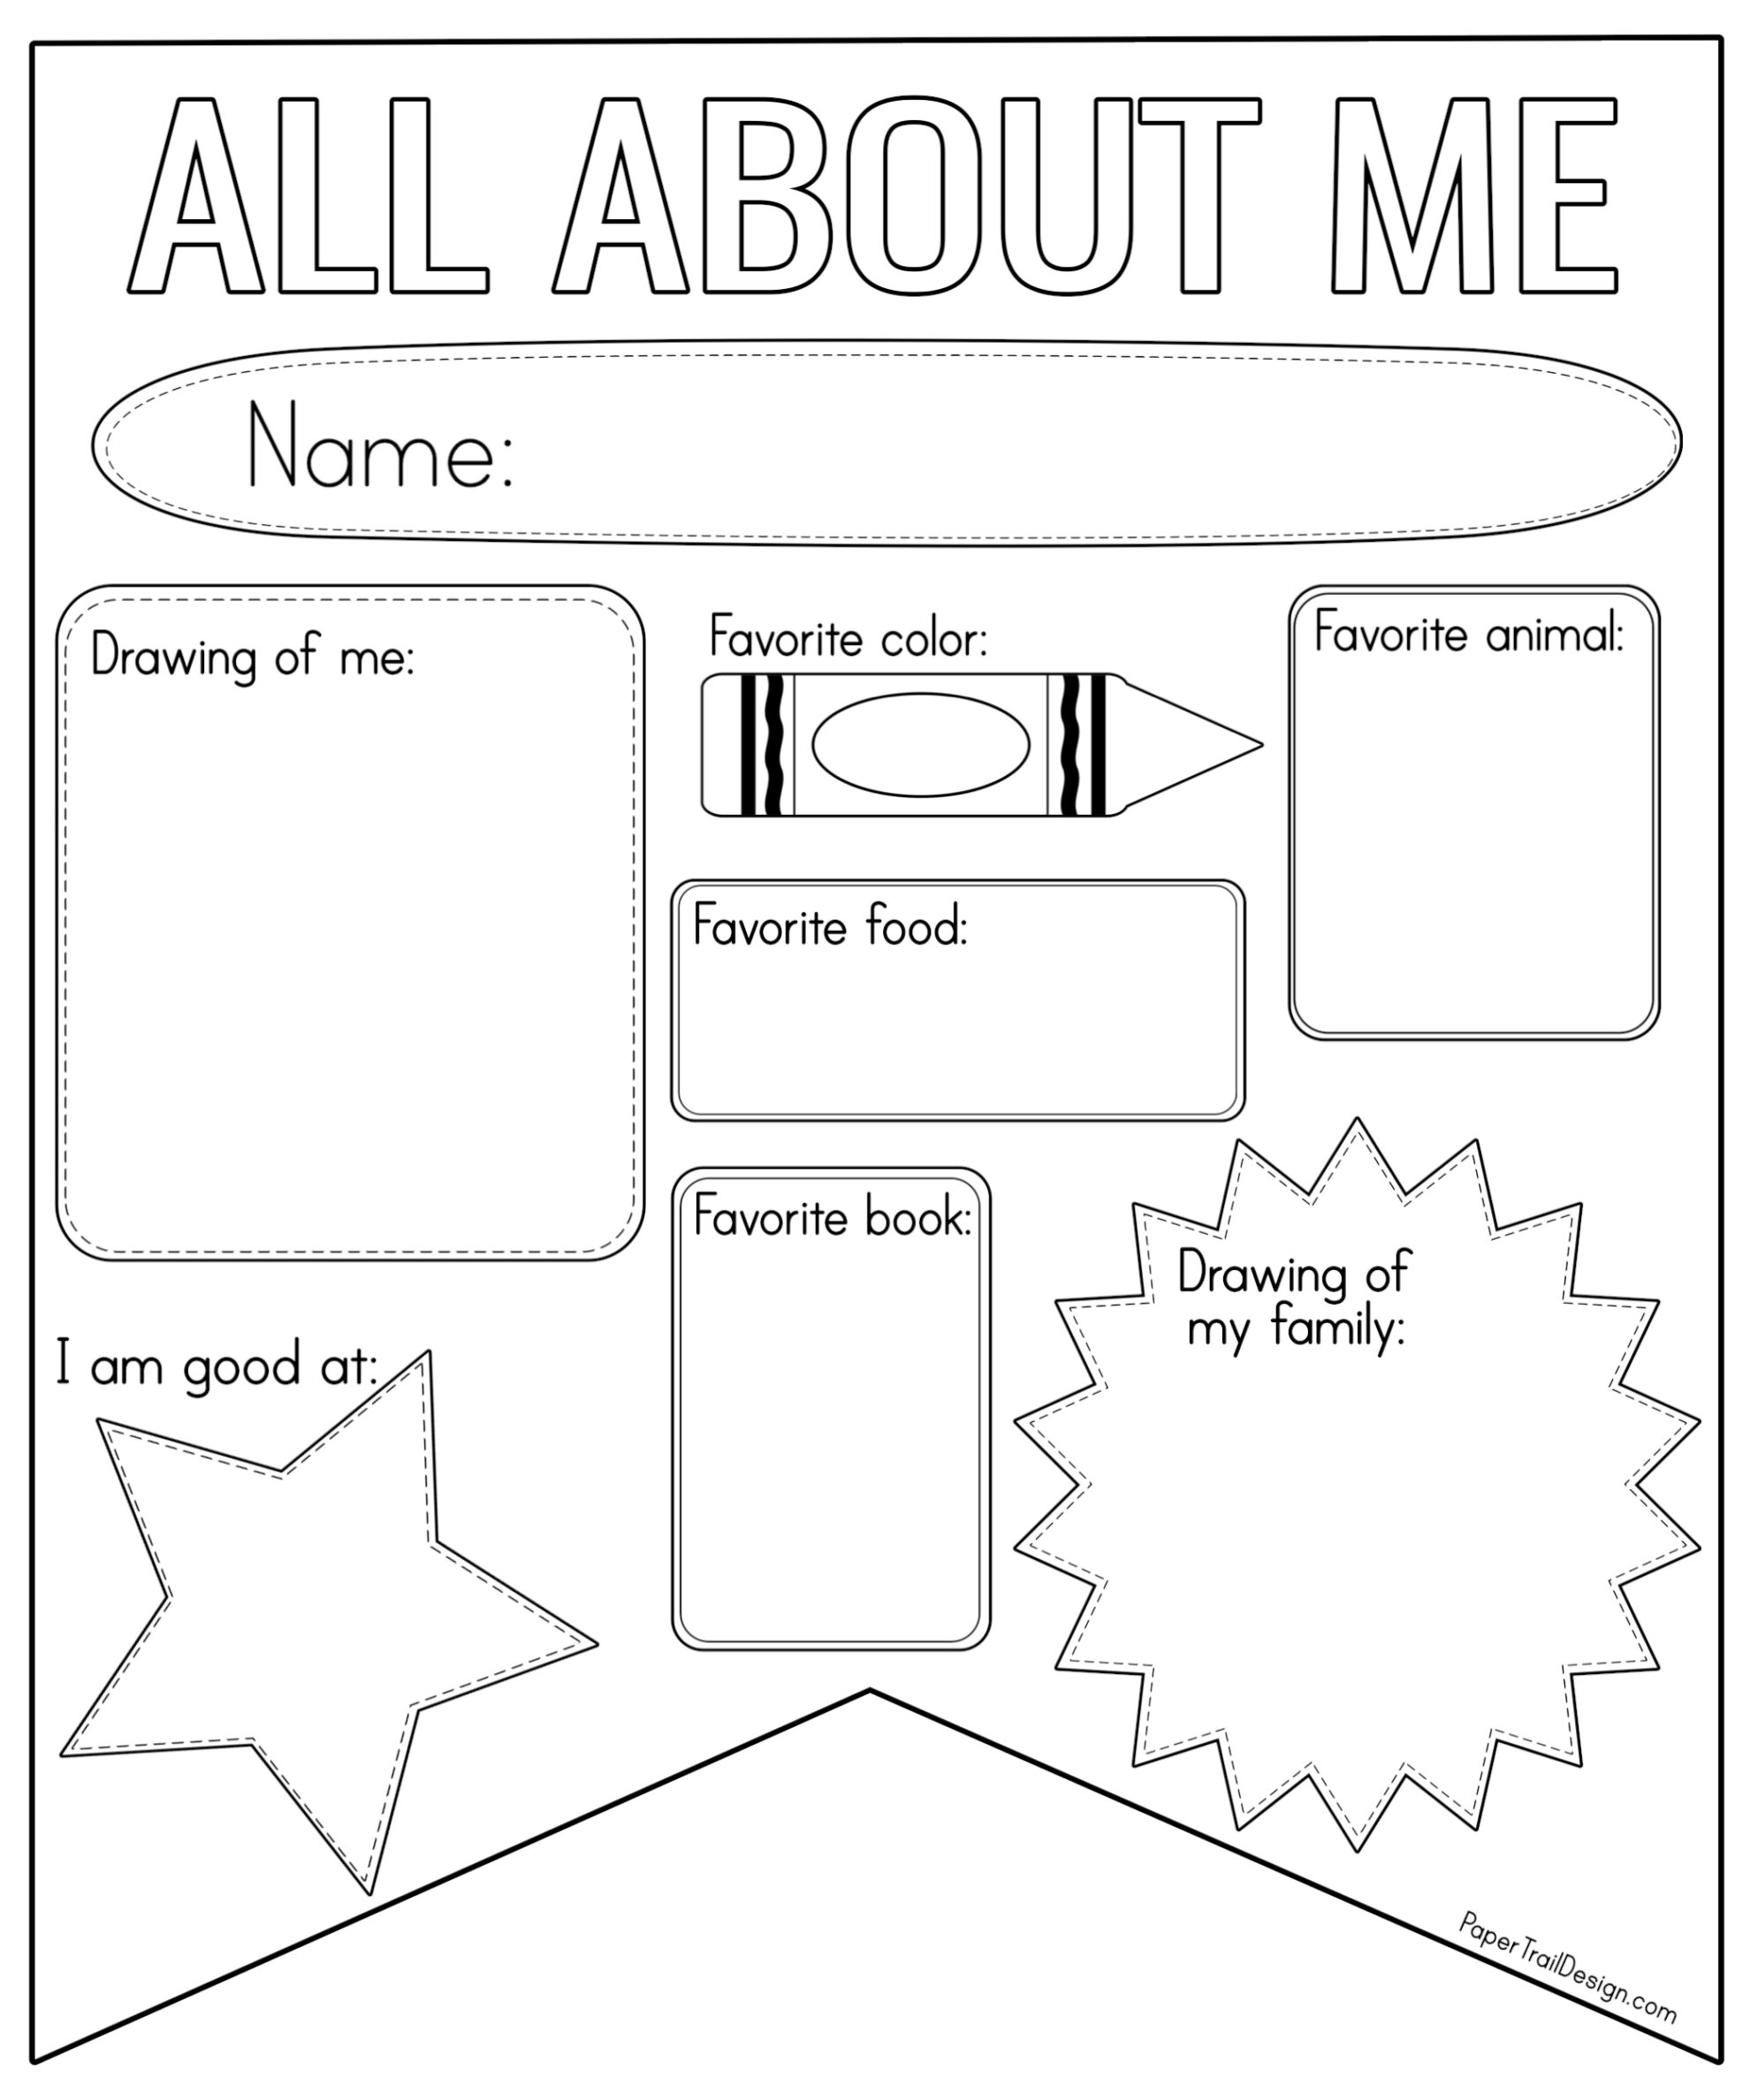 All About Me Template Free Printable Get What You Need For Free